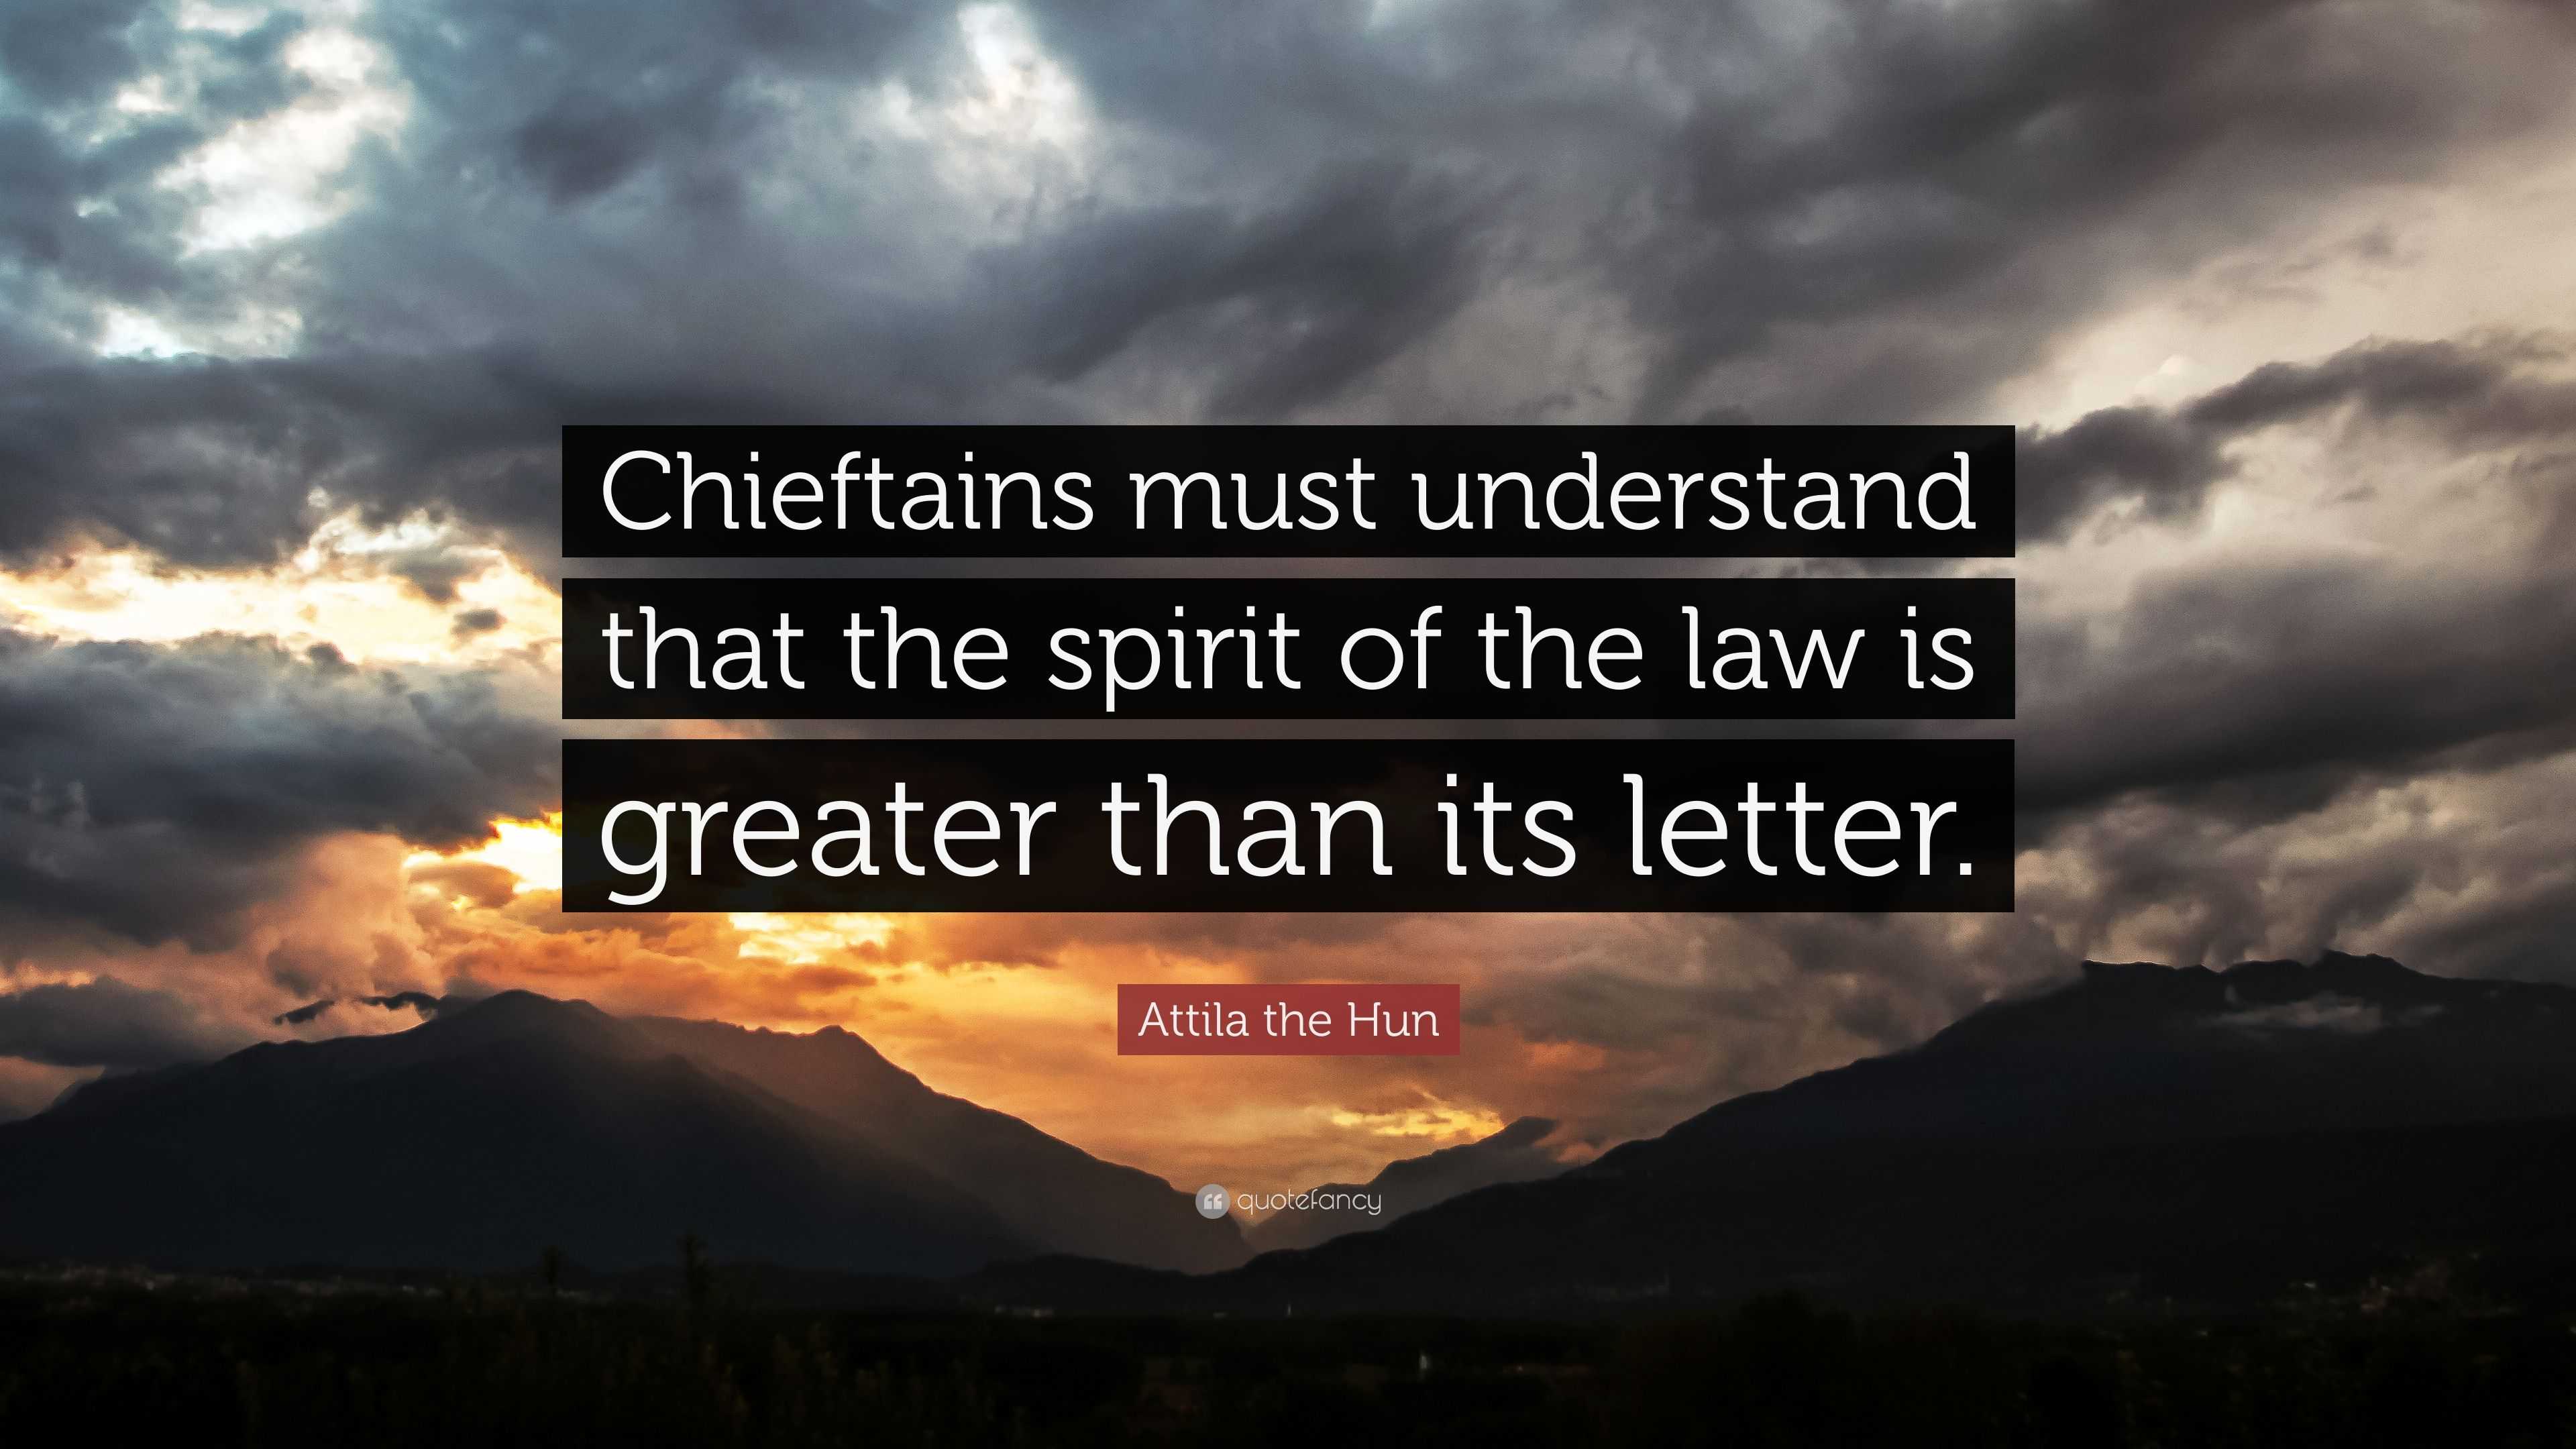 Attila the Hun Quote: “Chieftains must understand that the spirit of